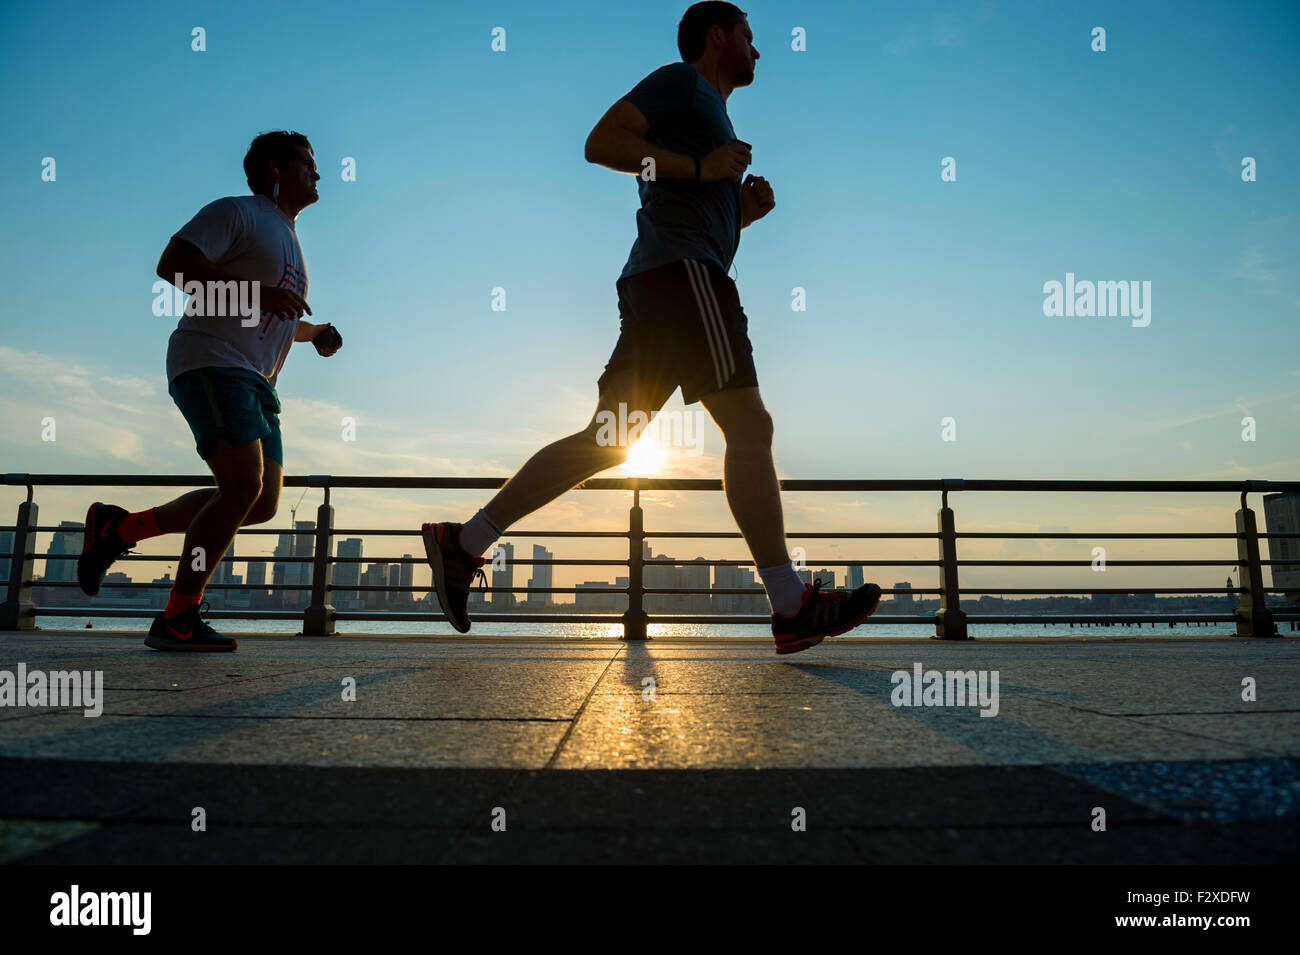 NEW YORK CITY, USA - AUGUST 15, 2015: Silhouettes of men run at sunset on the Hudson River boardwalk at sunset. Stock Photo